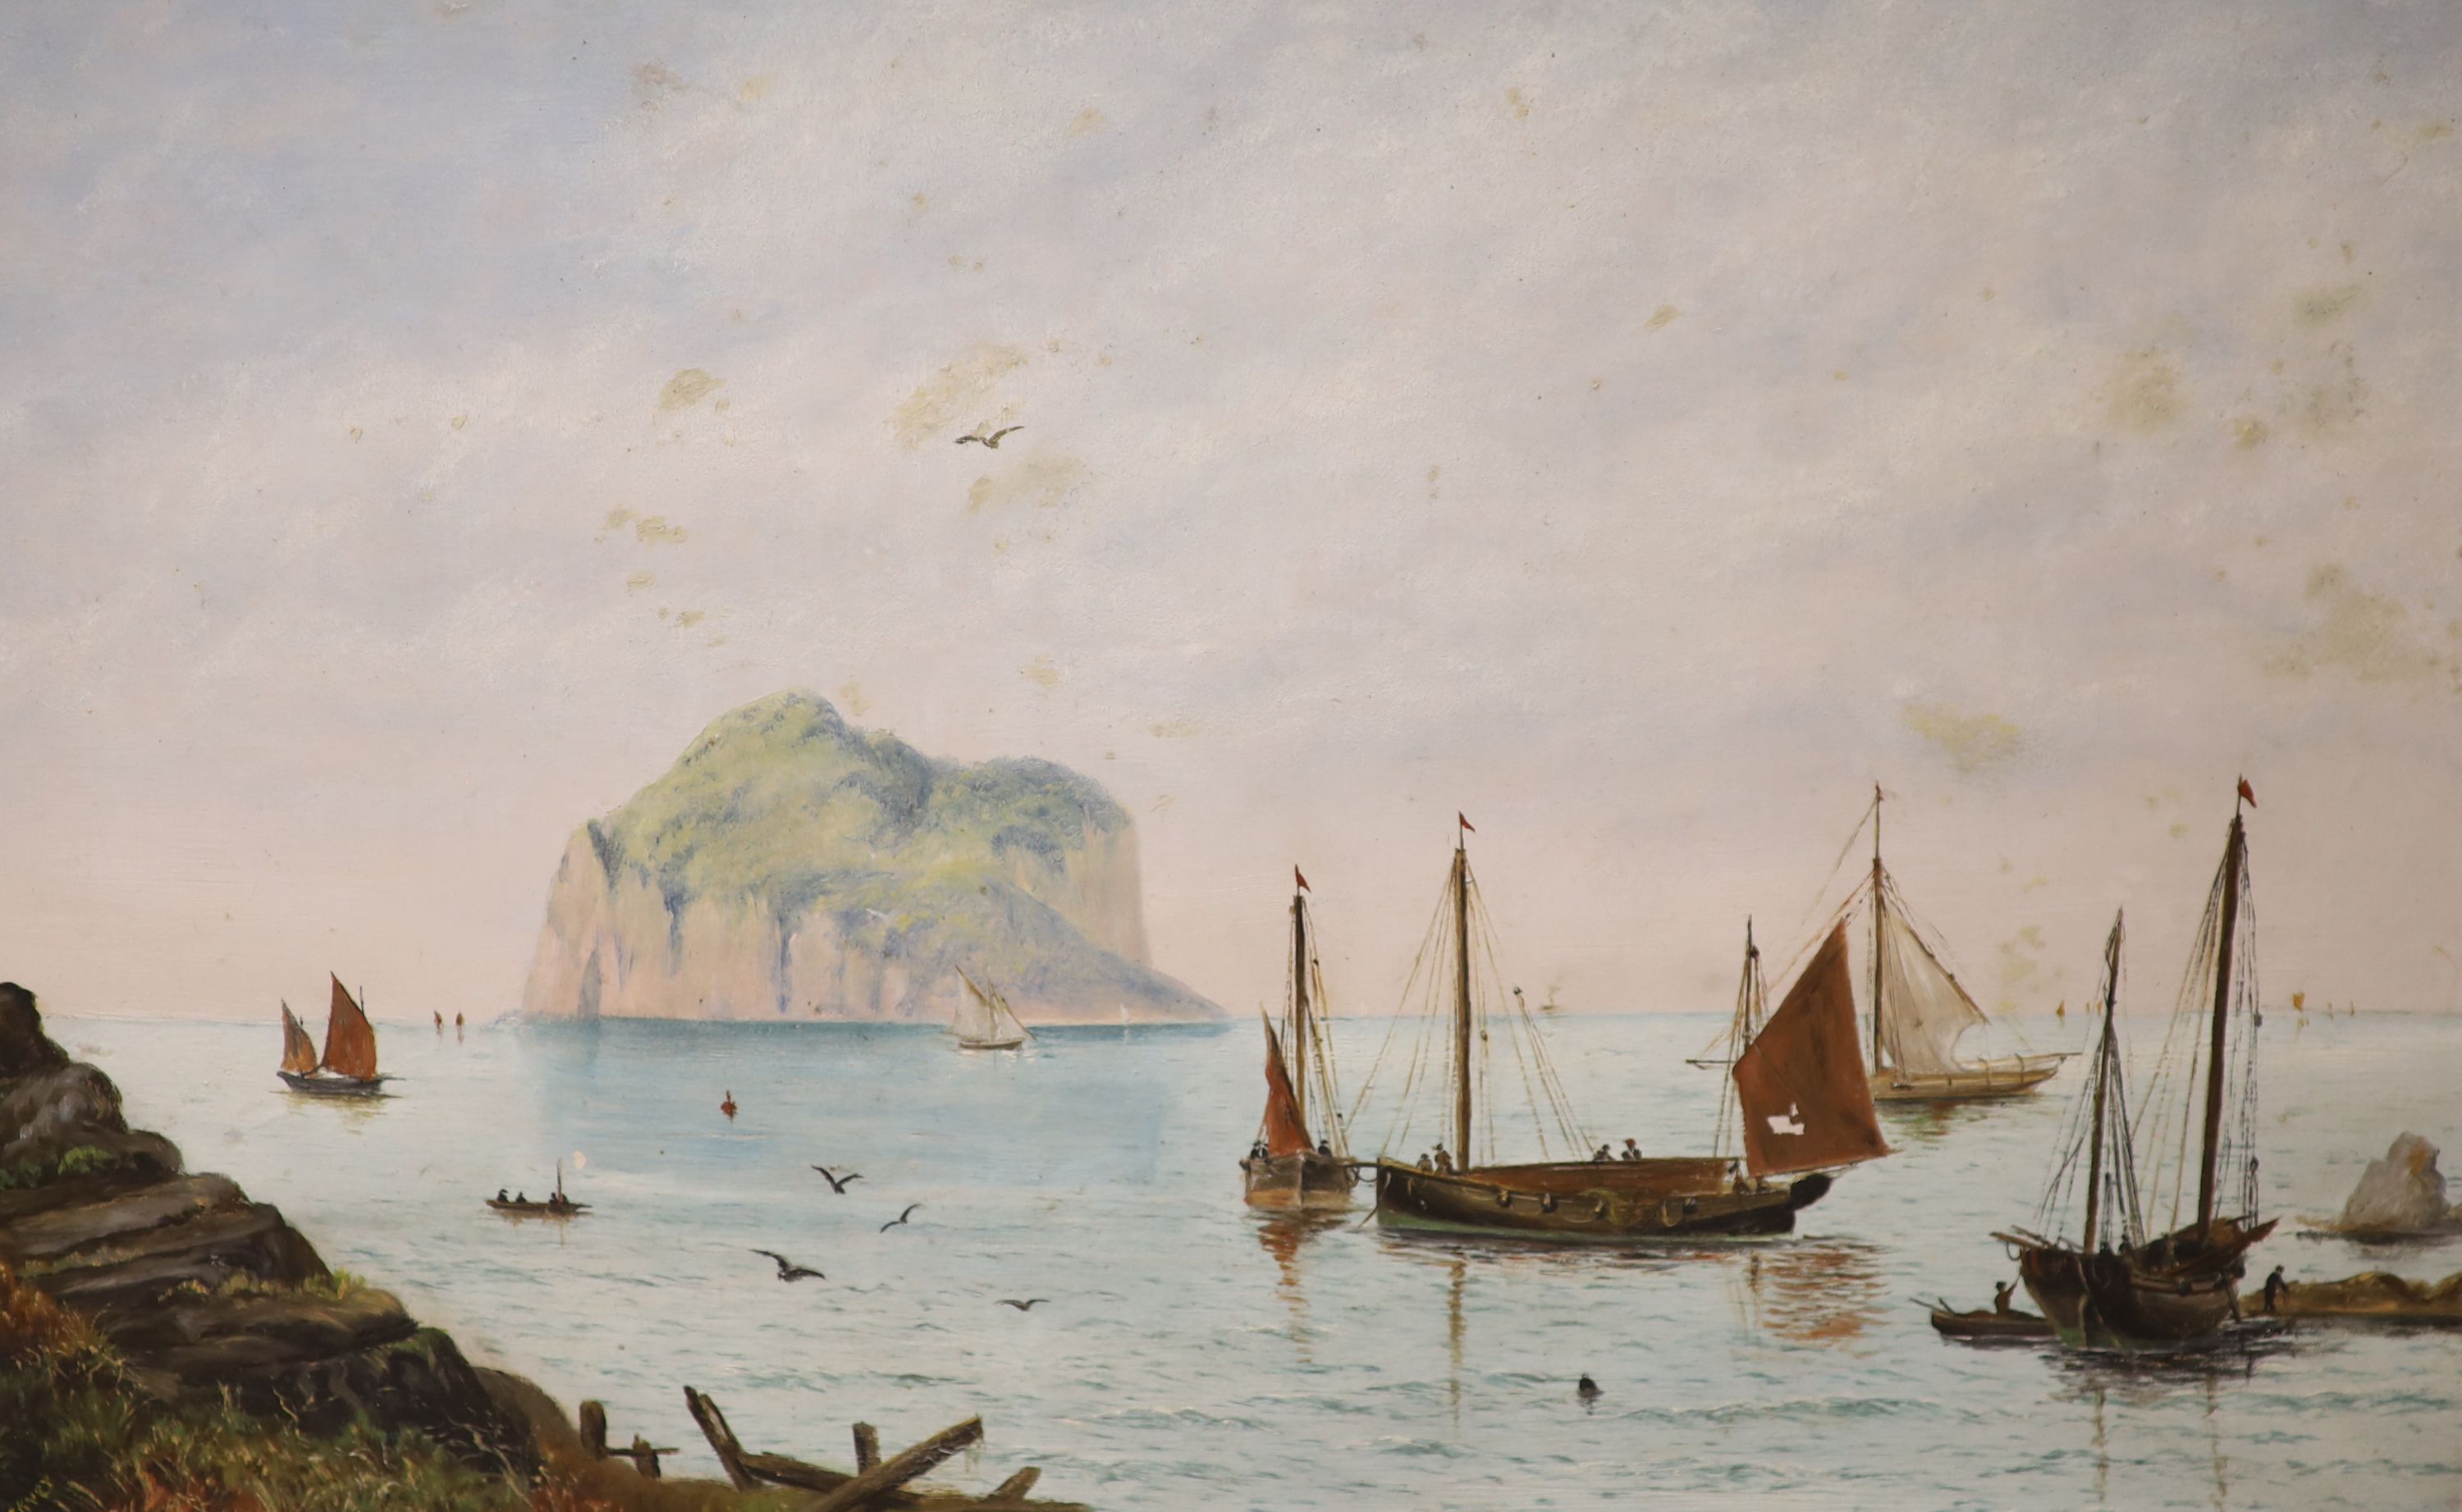 A. Stover, oil on board, Fishing boats off the coast, 30 x 46cm